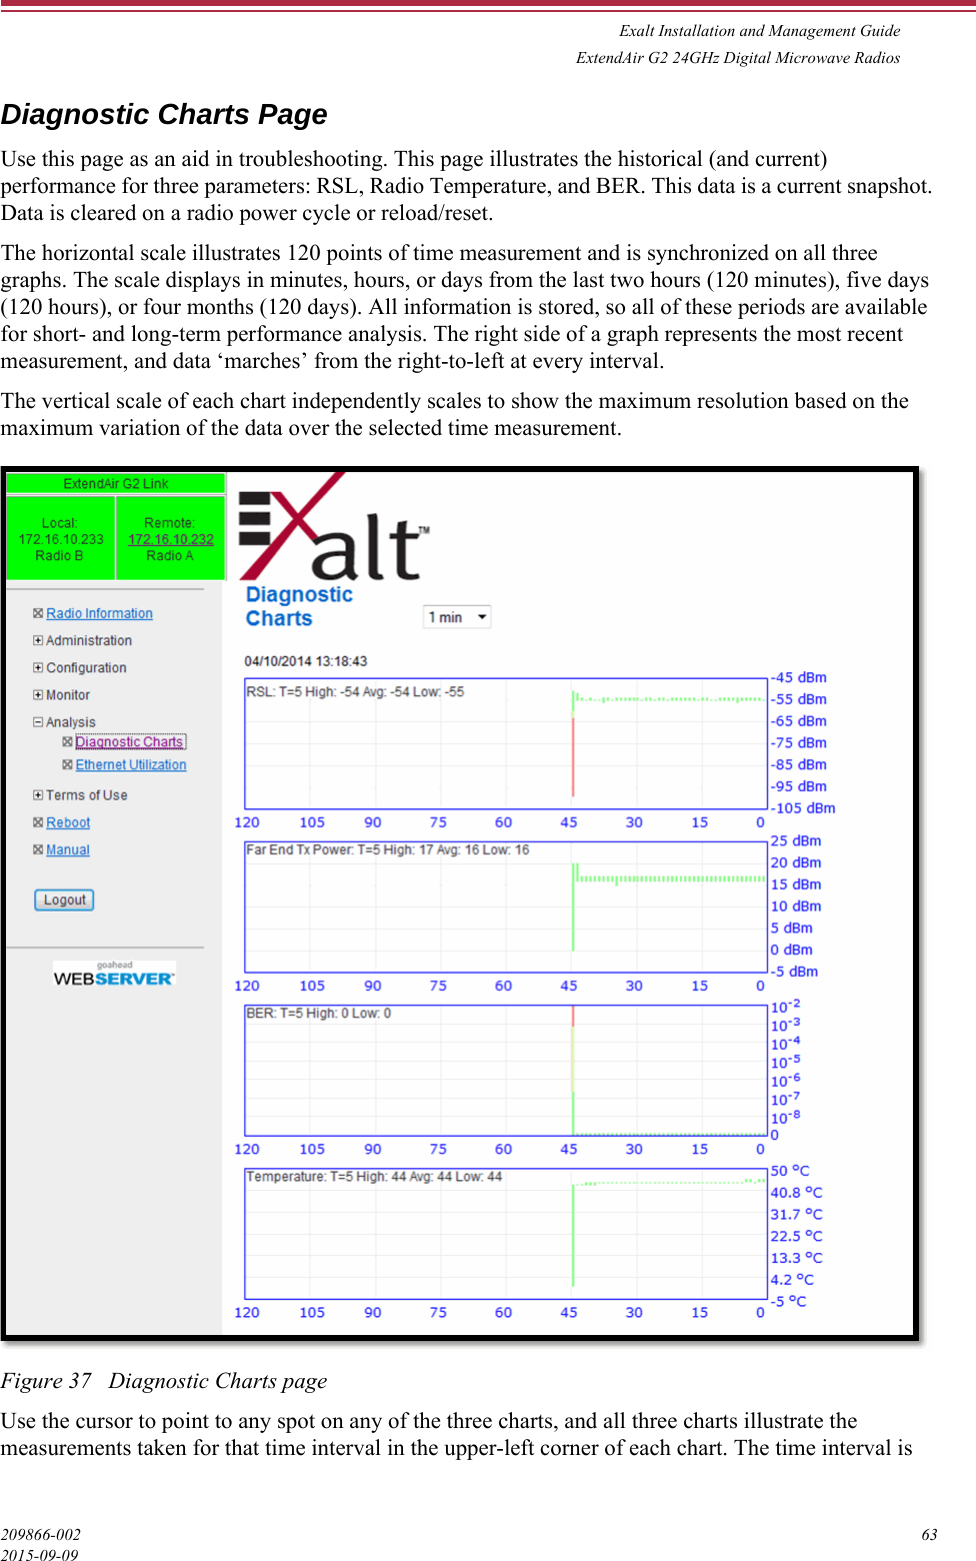 Exalt Installation and Management GuideExtendAir G2 24GHz Digital Microwave Radios209866-002 632015-09-09Diagnostic Charts PageUse this page as an aid in troubleshooting. This page illustrates the historical (and current) performance for three parameters: RSL, Radio Temperature, and BER. This data is a current snapshot. Data is cleared on a radio power cycle or reload/reset.The horizontal scale illustrates 120 points of time measurement and is synchronized on all three graphs. The scale displays in minutes, hours, or days from the last two hours (120 minutes), five days (120 hours), or four months (120 days). All information is stored, so all of these periods are available for short- and long-term performance analysis. The right side of a graph represents the most recent measurement, and data ‘marches’ from the right-to-left at every interval.The vertical scale of each chart independently scales to show the maximum resolution based on the maximum variation of the data over the selected time measurement. Figure 37   Diagnostic Charts pageUse the cursor to point to any spot on any of the three charts, and all three charts illustrate the measurements taken for that time interval in the upper-left corner of each chart. The time interval is 